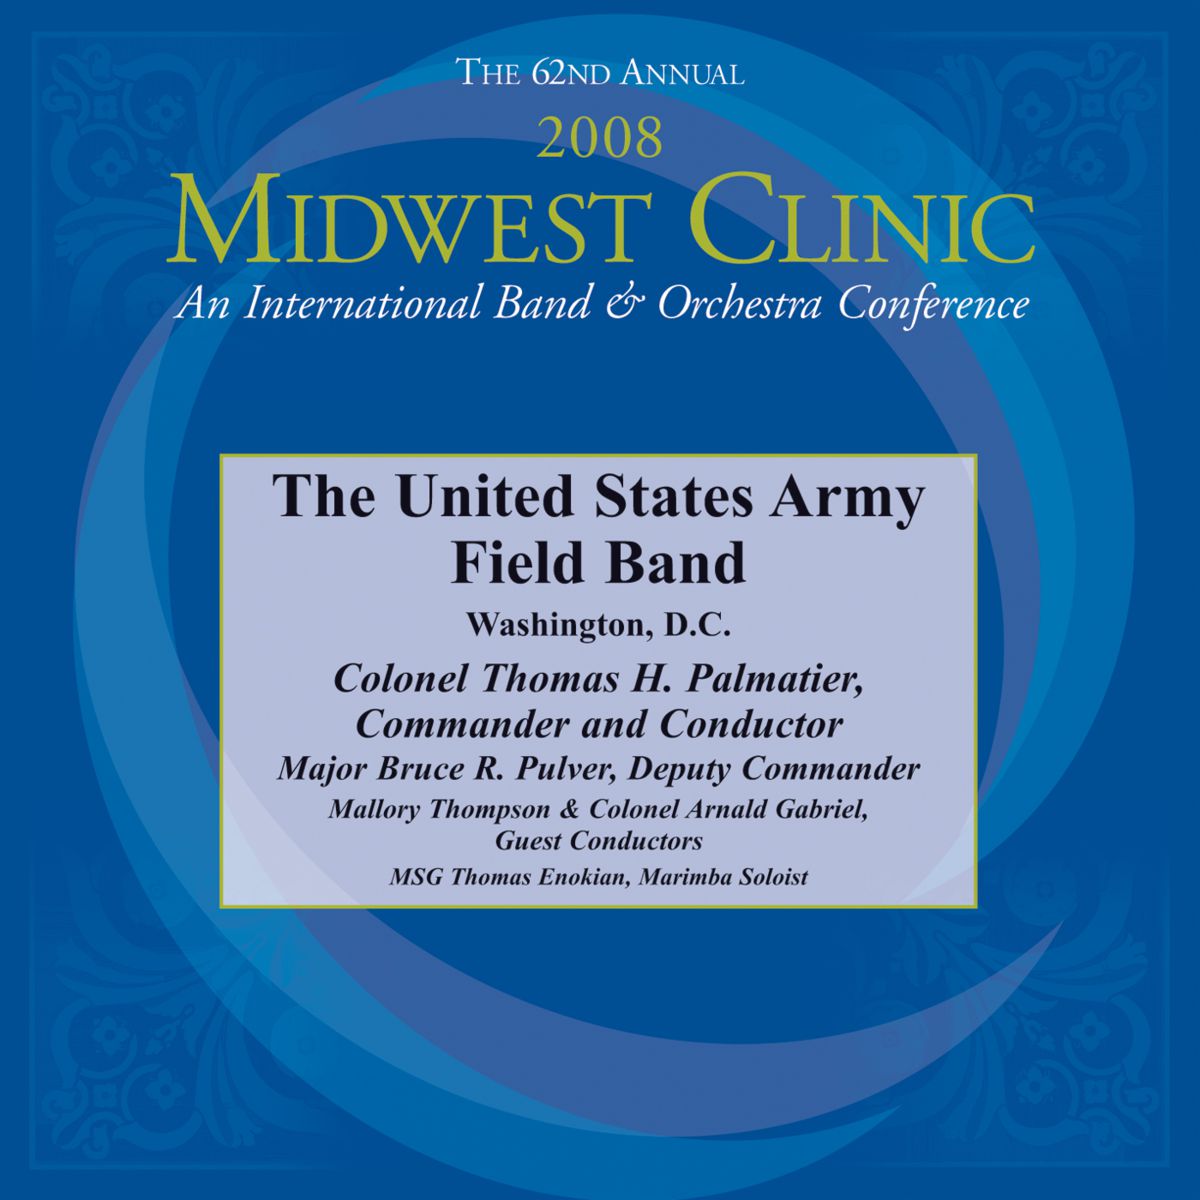 2008 Midwest Clinic: The United States Army Field Band - cliquer ici